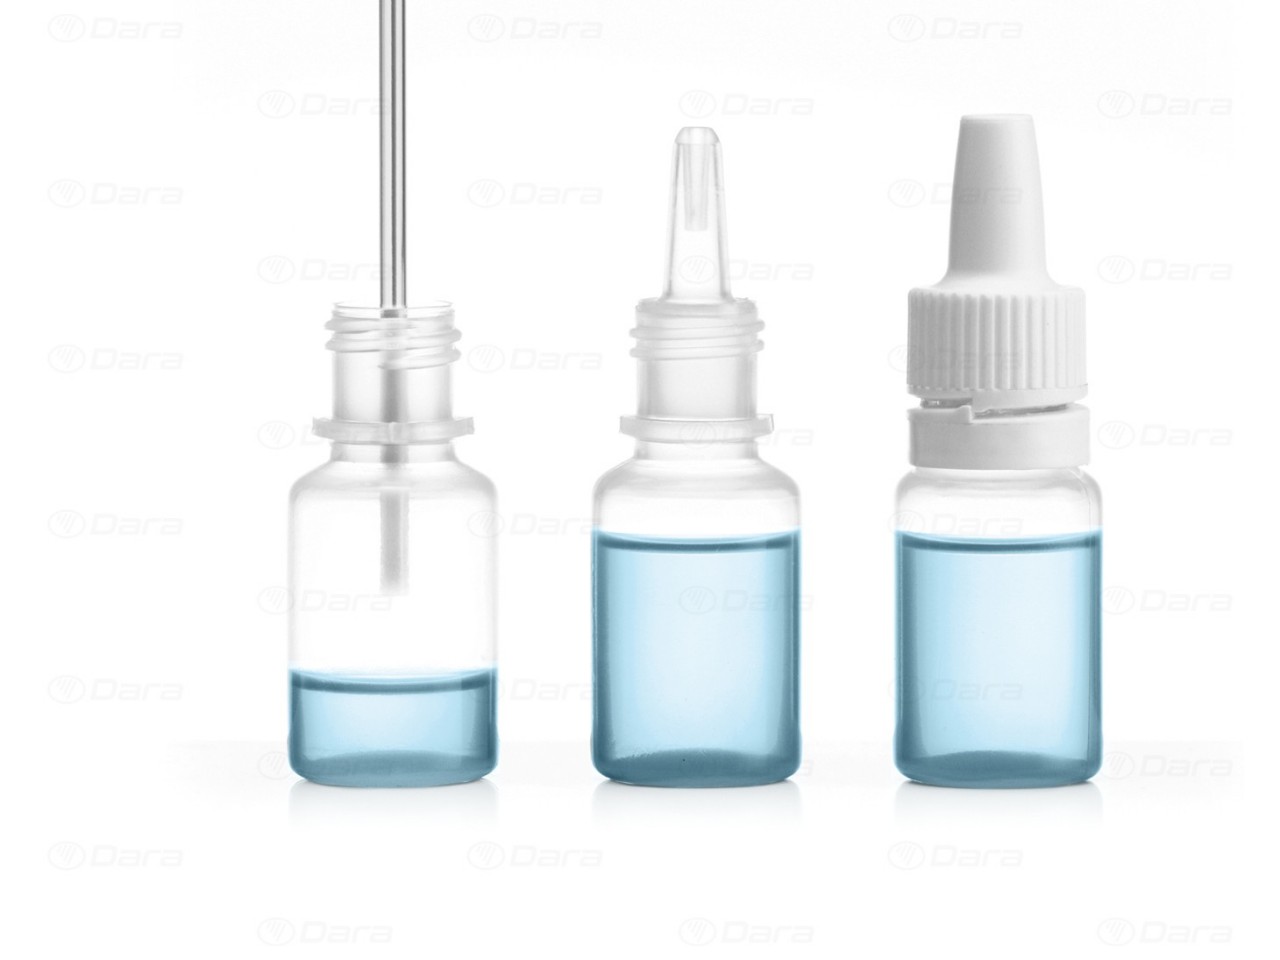 Rotary fillers - cappers for ophthalmic and nasal